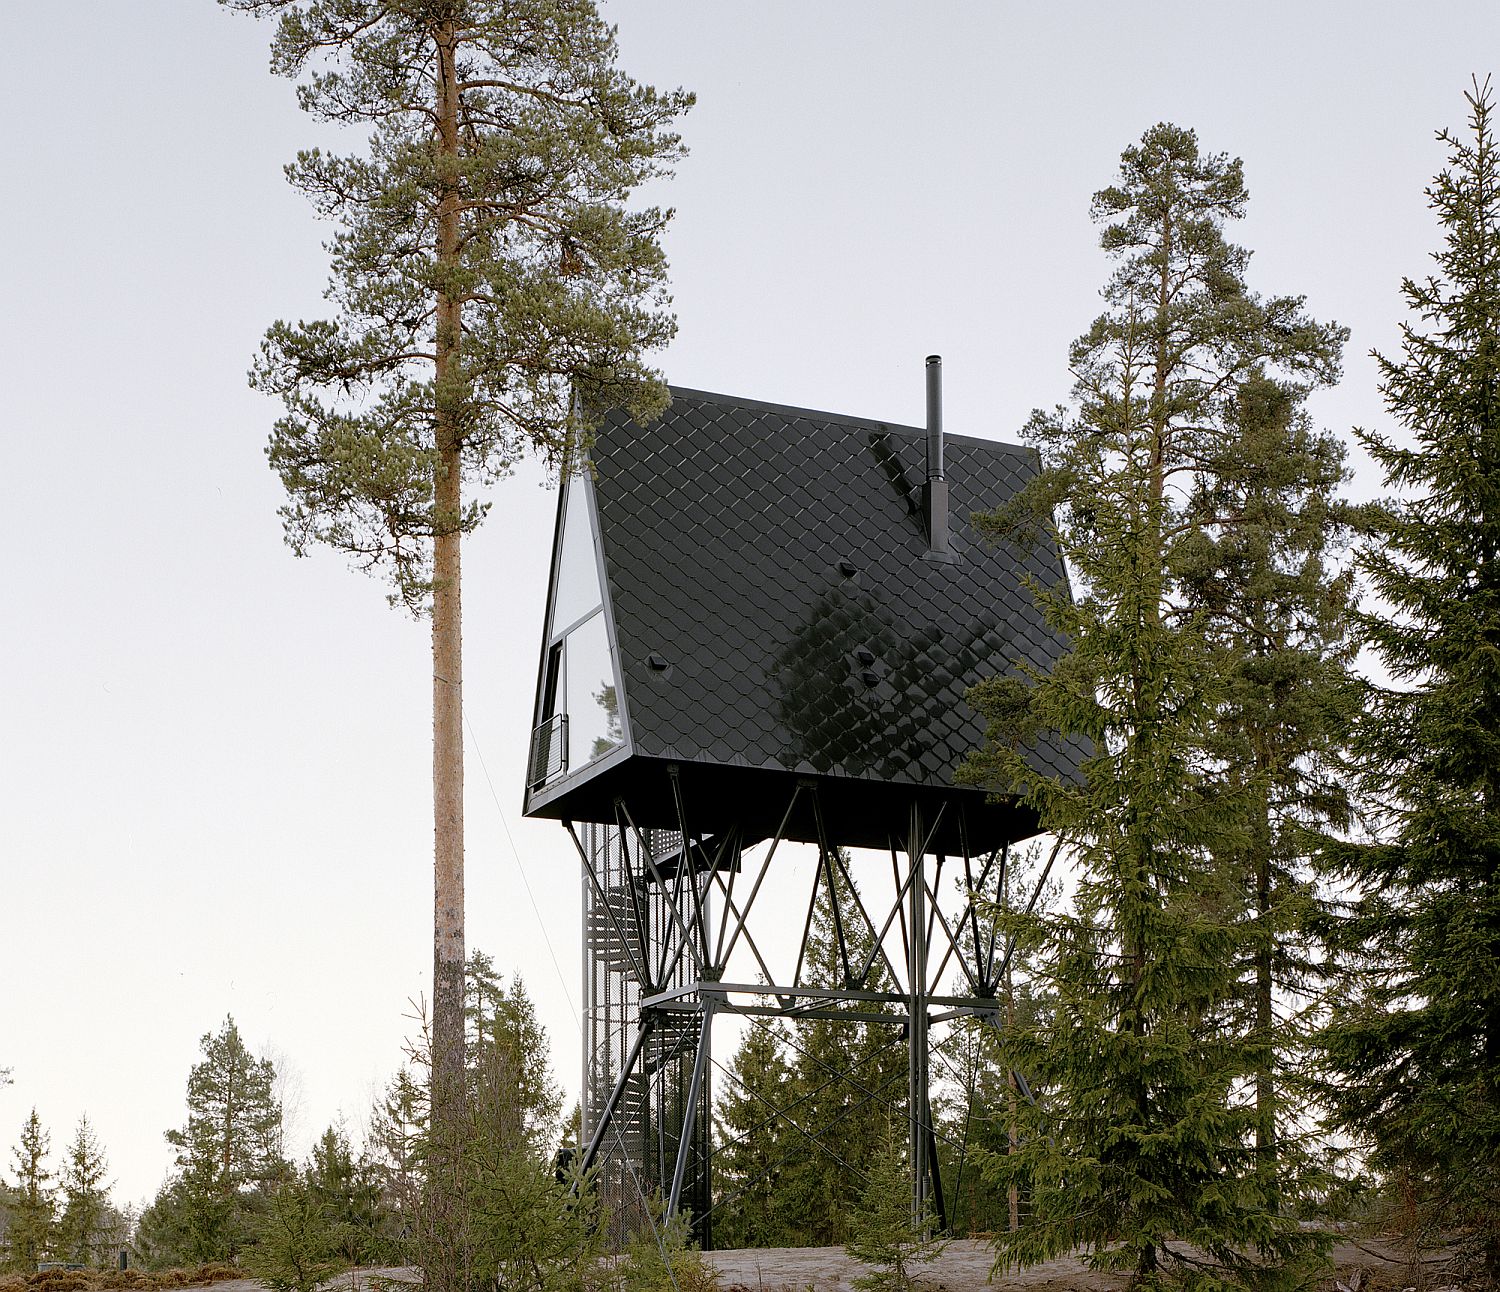 Unique and modern rental cabins in forests of Norway that stand on steel beams